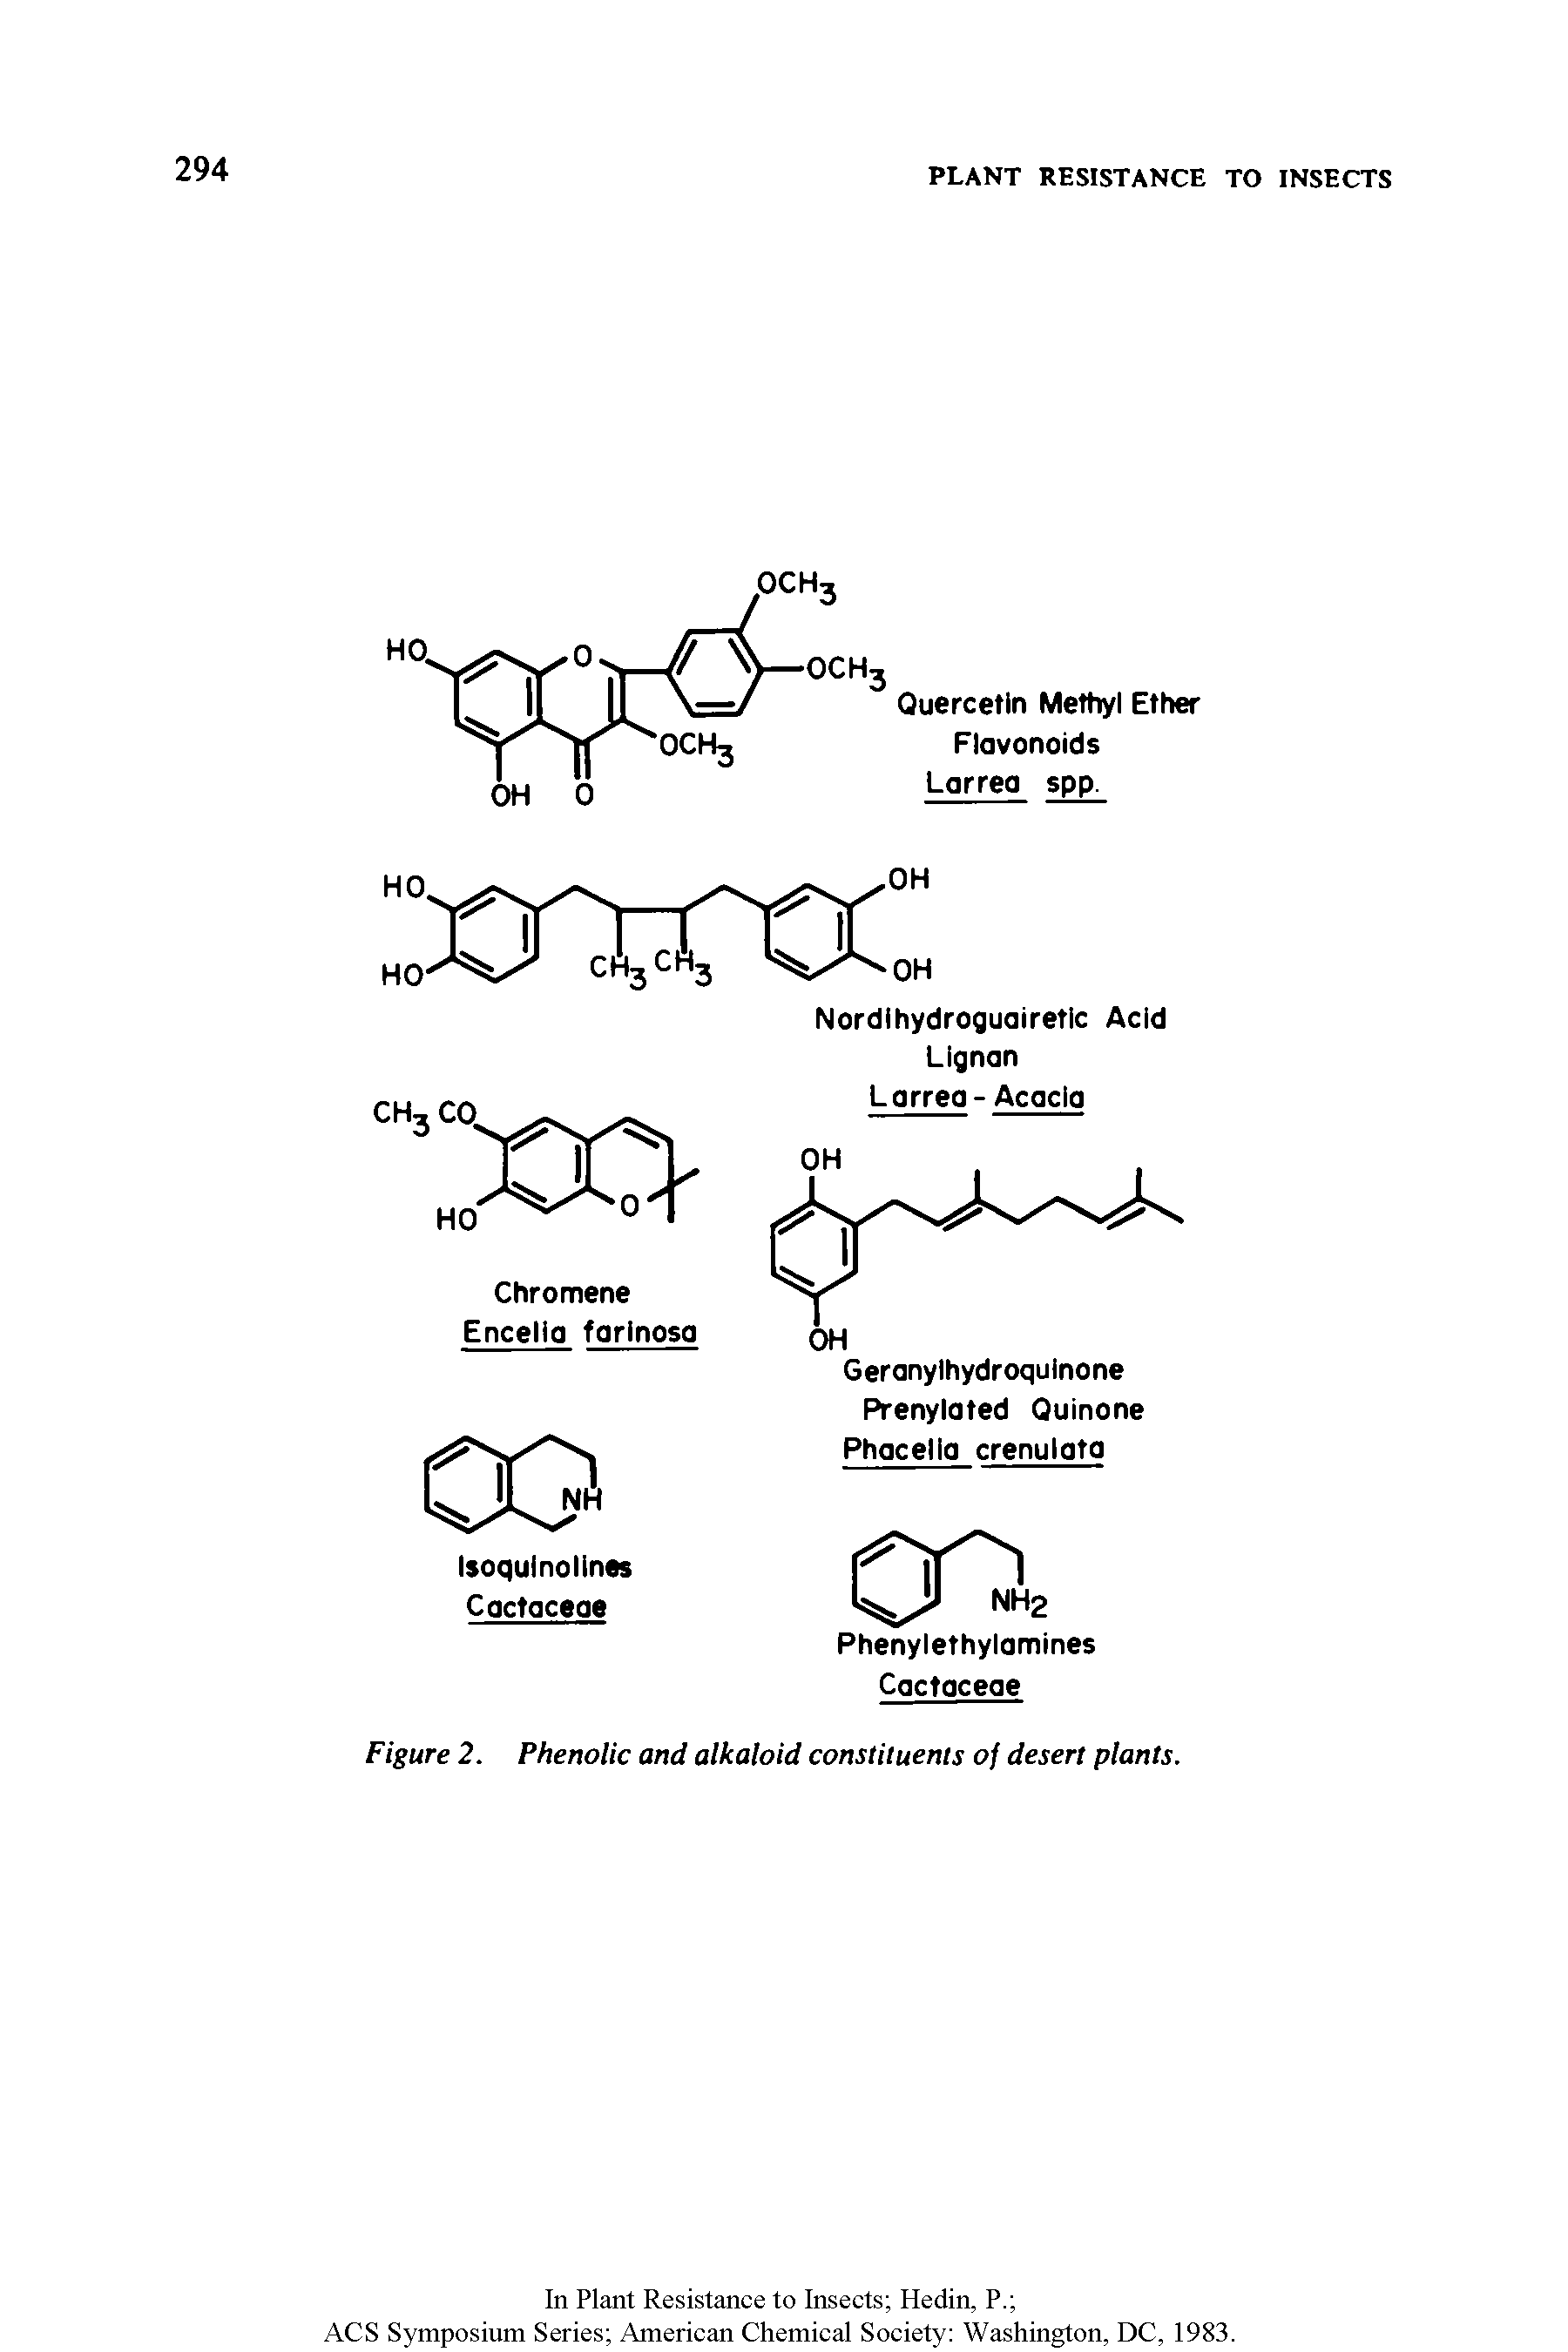 Figure 2. Phenolic and alkaloid constituents of desert plants.